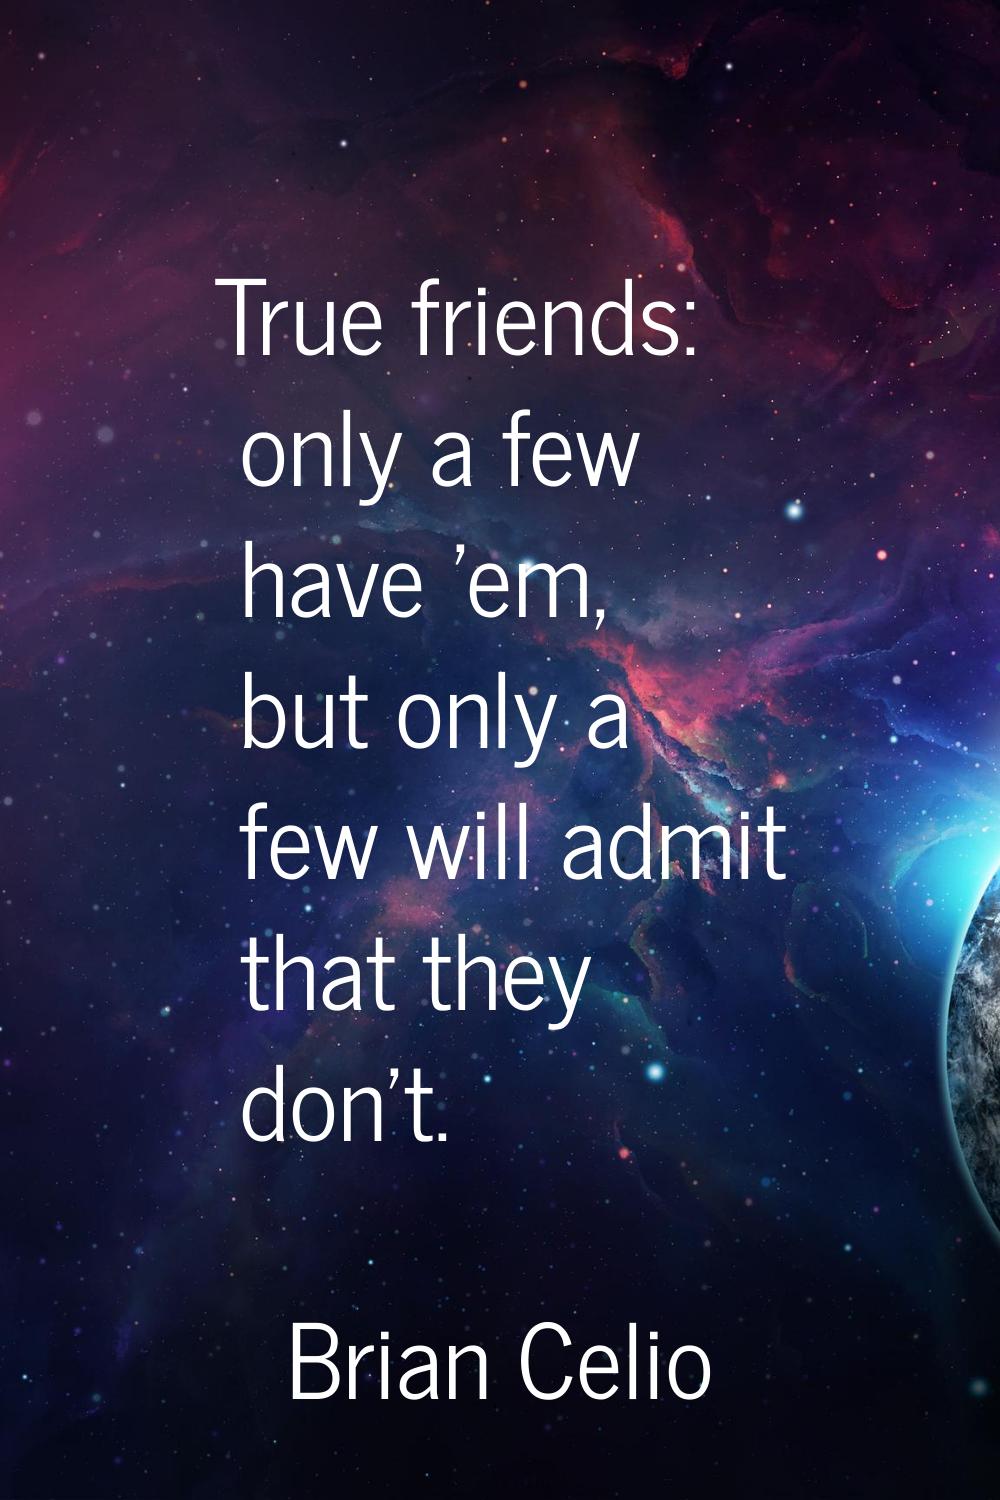 True friends: only a few have 'em, but only a few will admit that they don't.